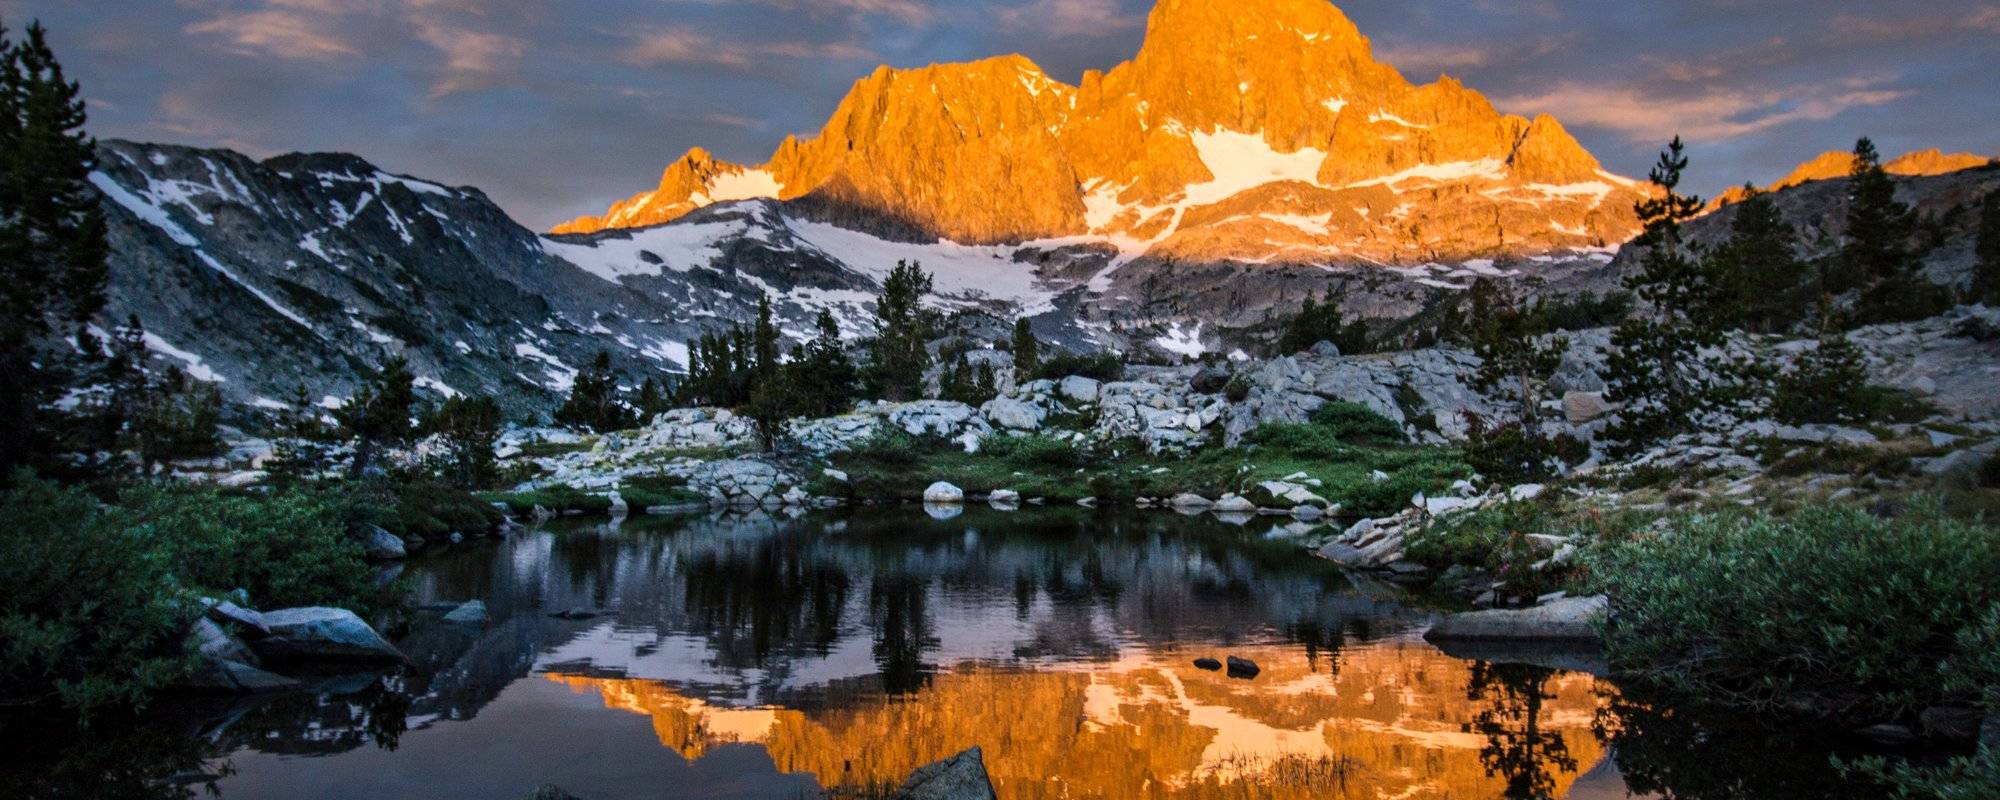 3-day Backpacking Trip in the Ansel Adams Wilderness